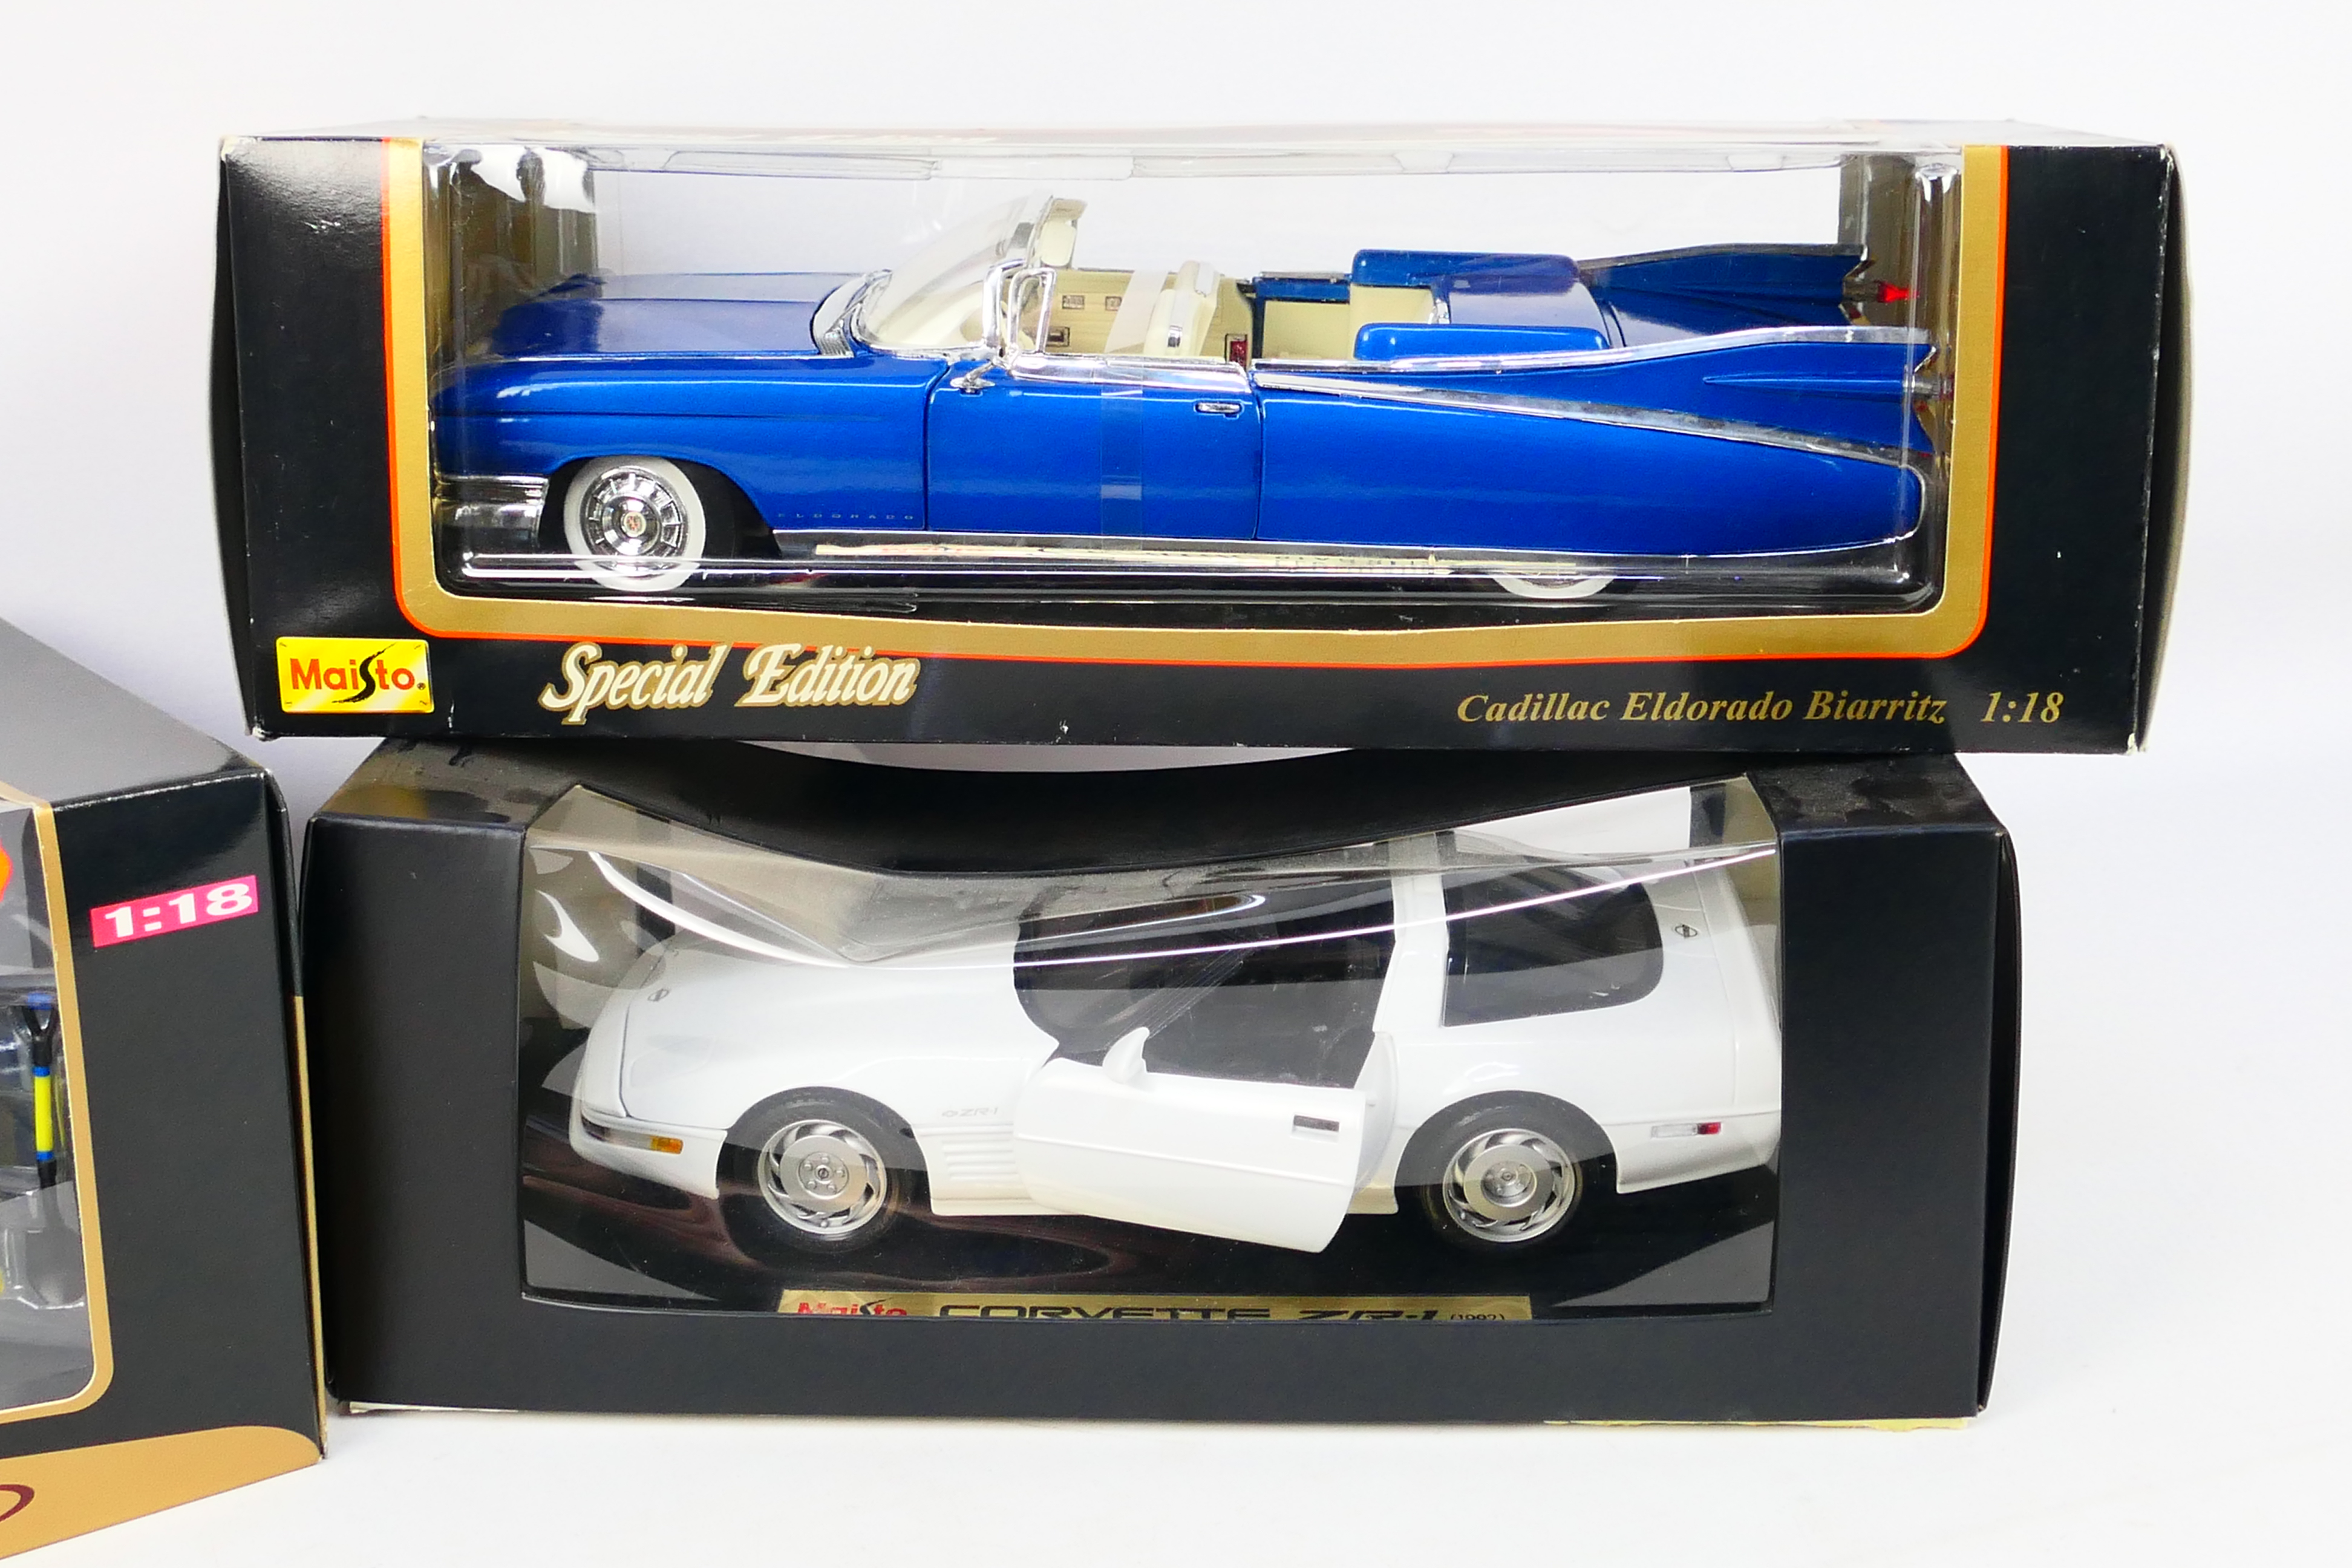 Maisto - Three boxed 1:18 scale diecast model cars from Maisto. - Image 2 of 3